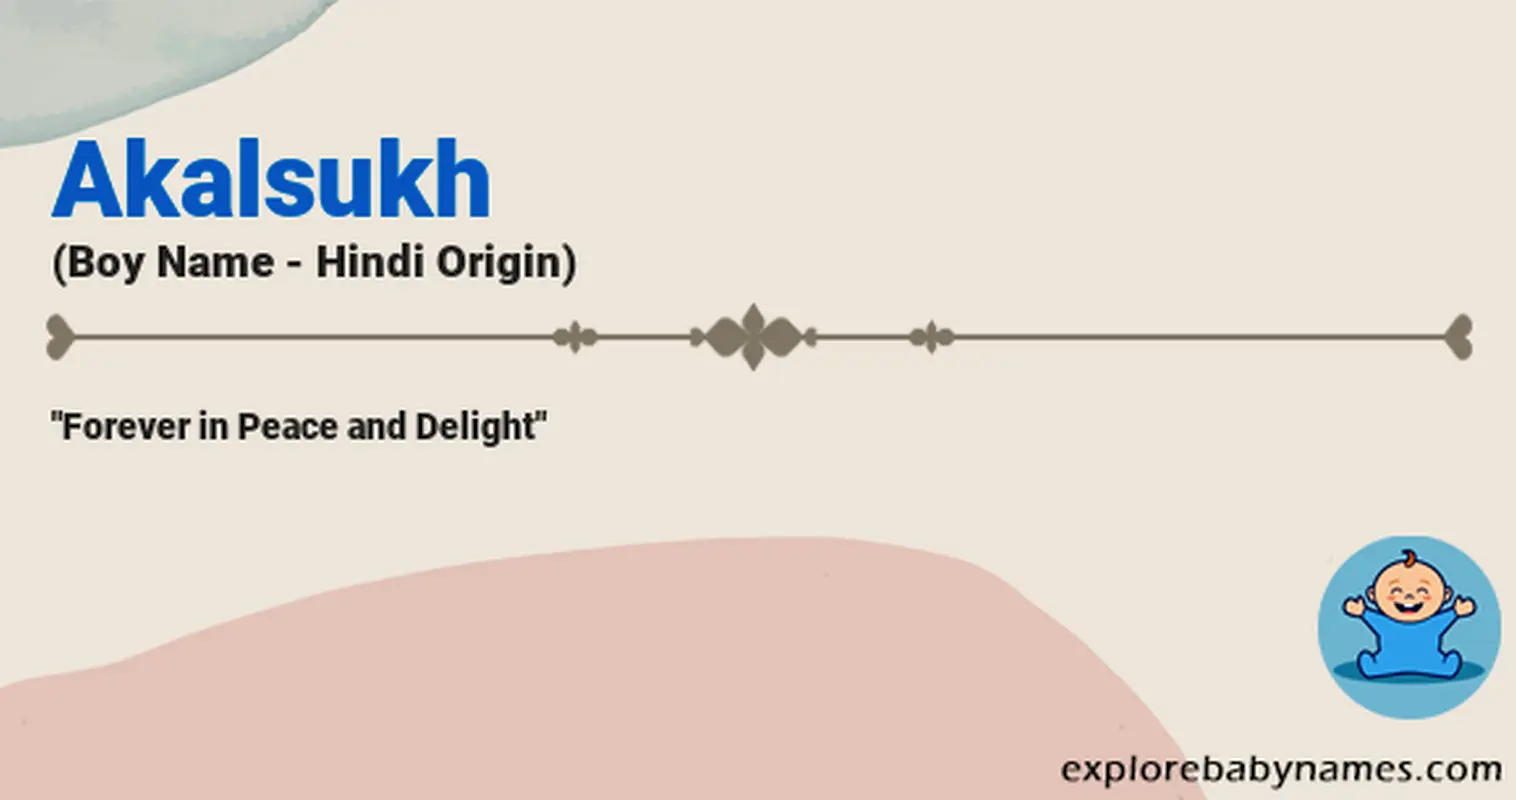 Meaning of Akalsukh